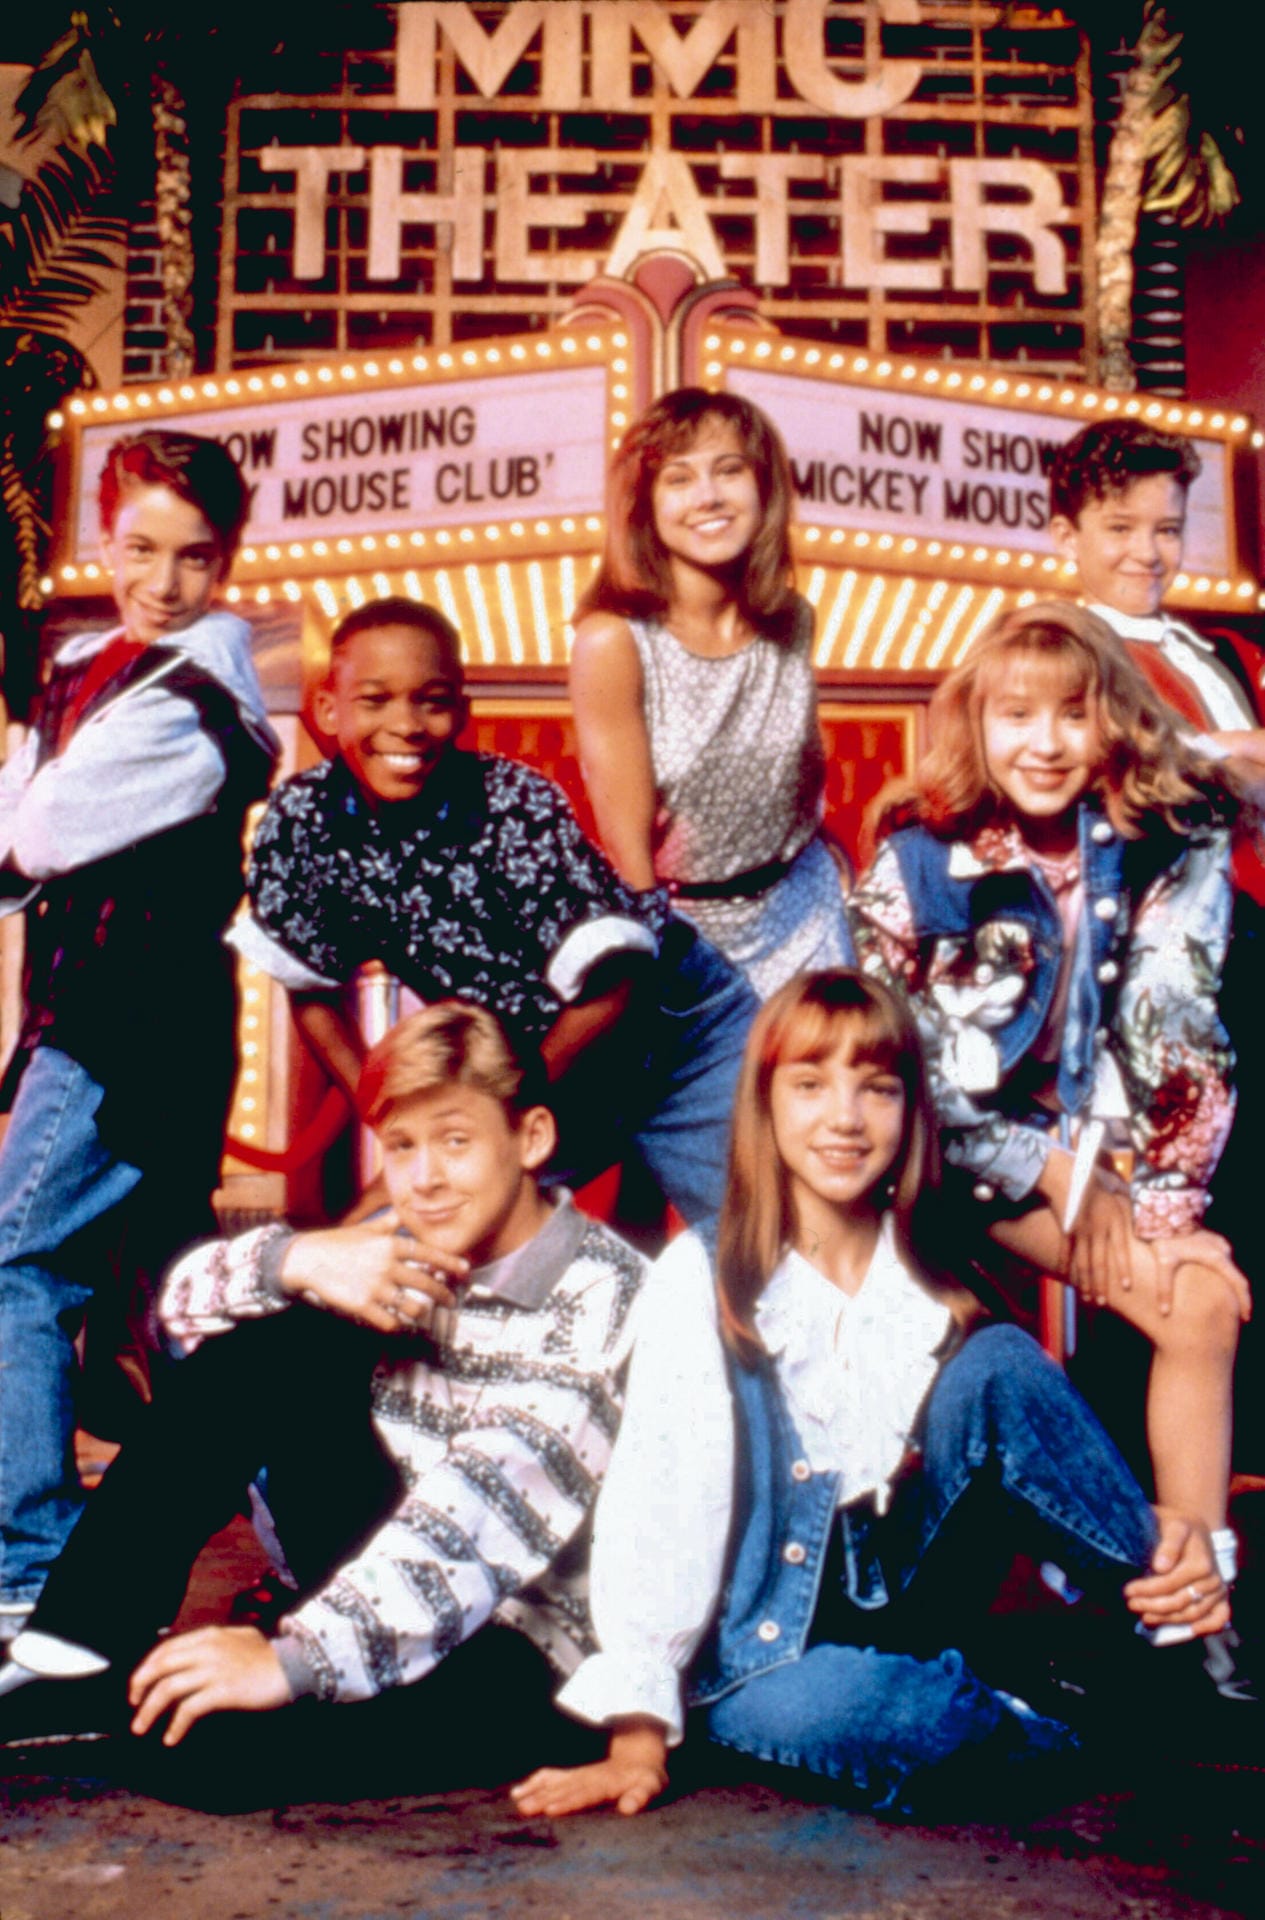 "The All New Mickey Mouse Club" Anfang der Neunziger: Nikki DeLoach, Justin Timberlake, Christina Aguilera, Britney Spears, Ryan Gosling, T.J. Fantini und Tate Lynche.